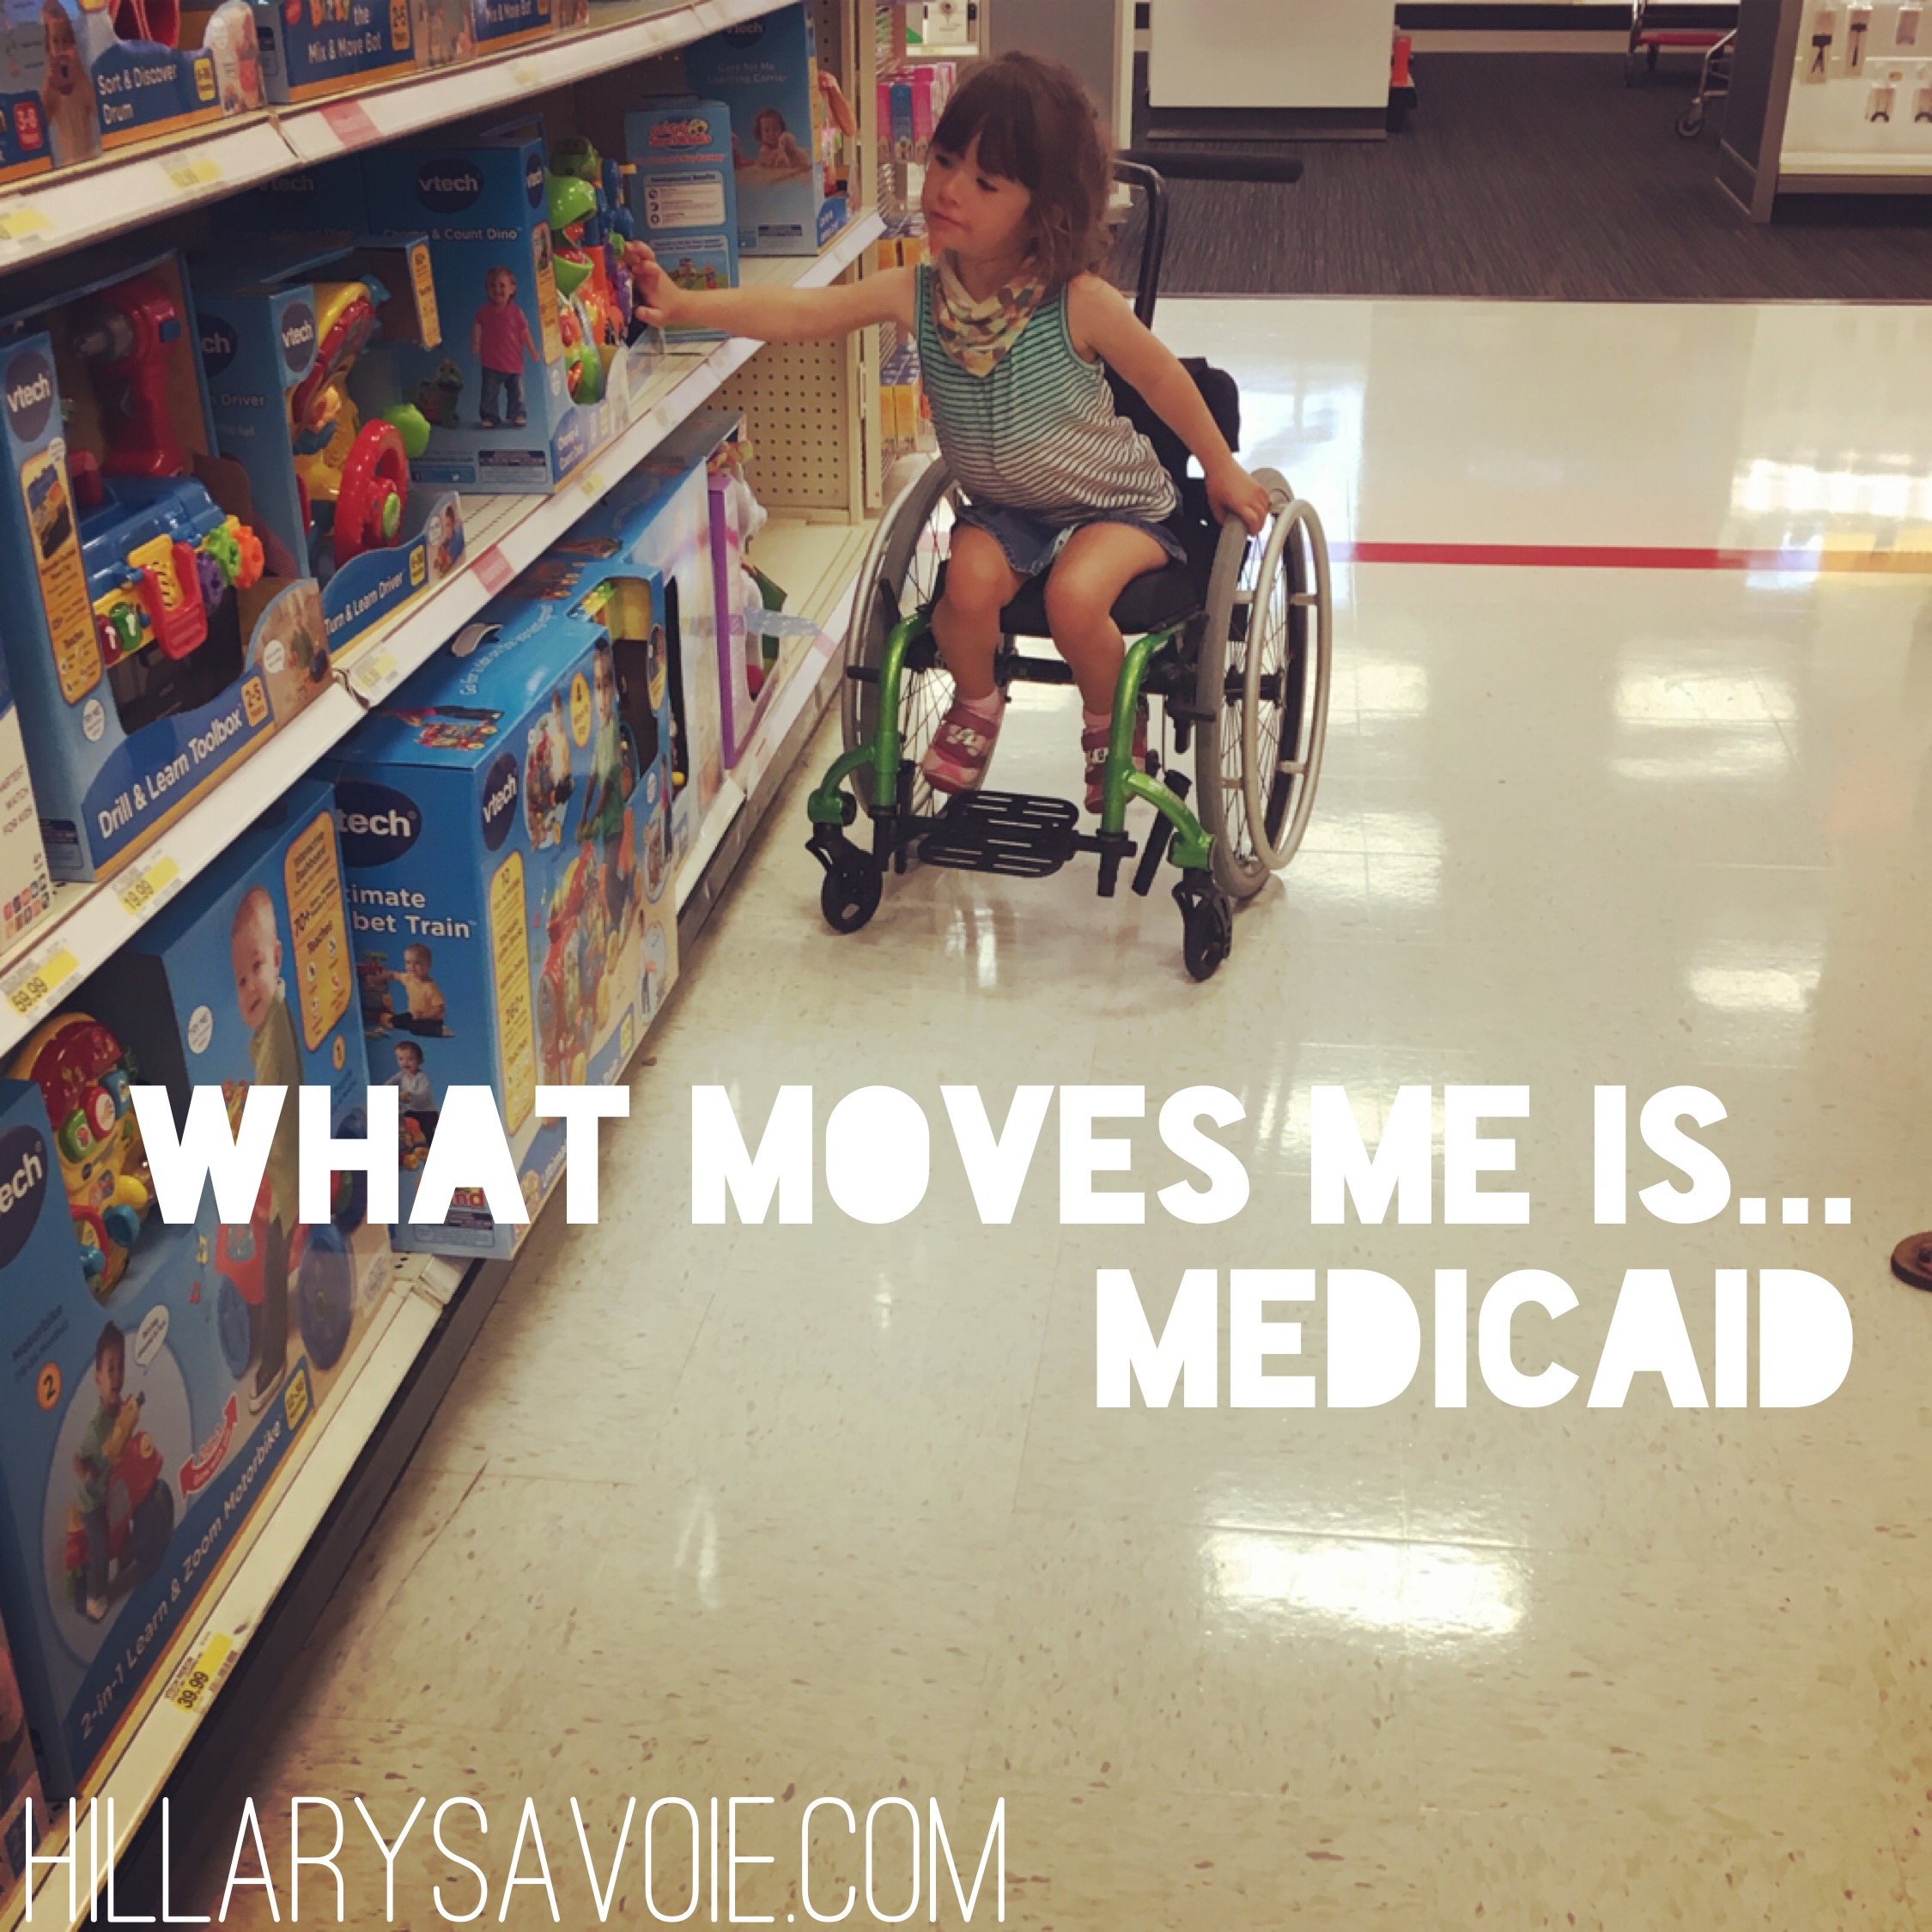 What moves me is…Medicaid.